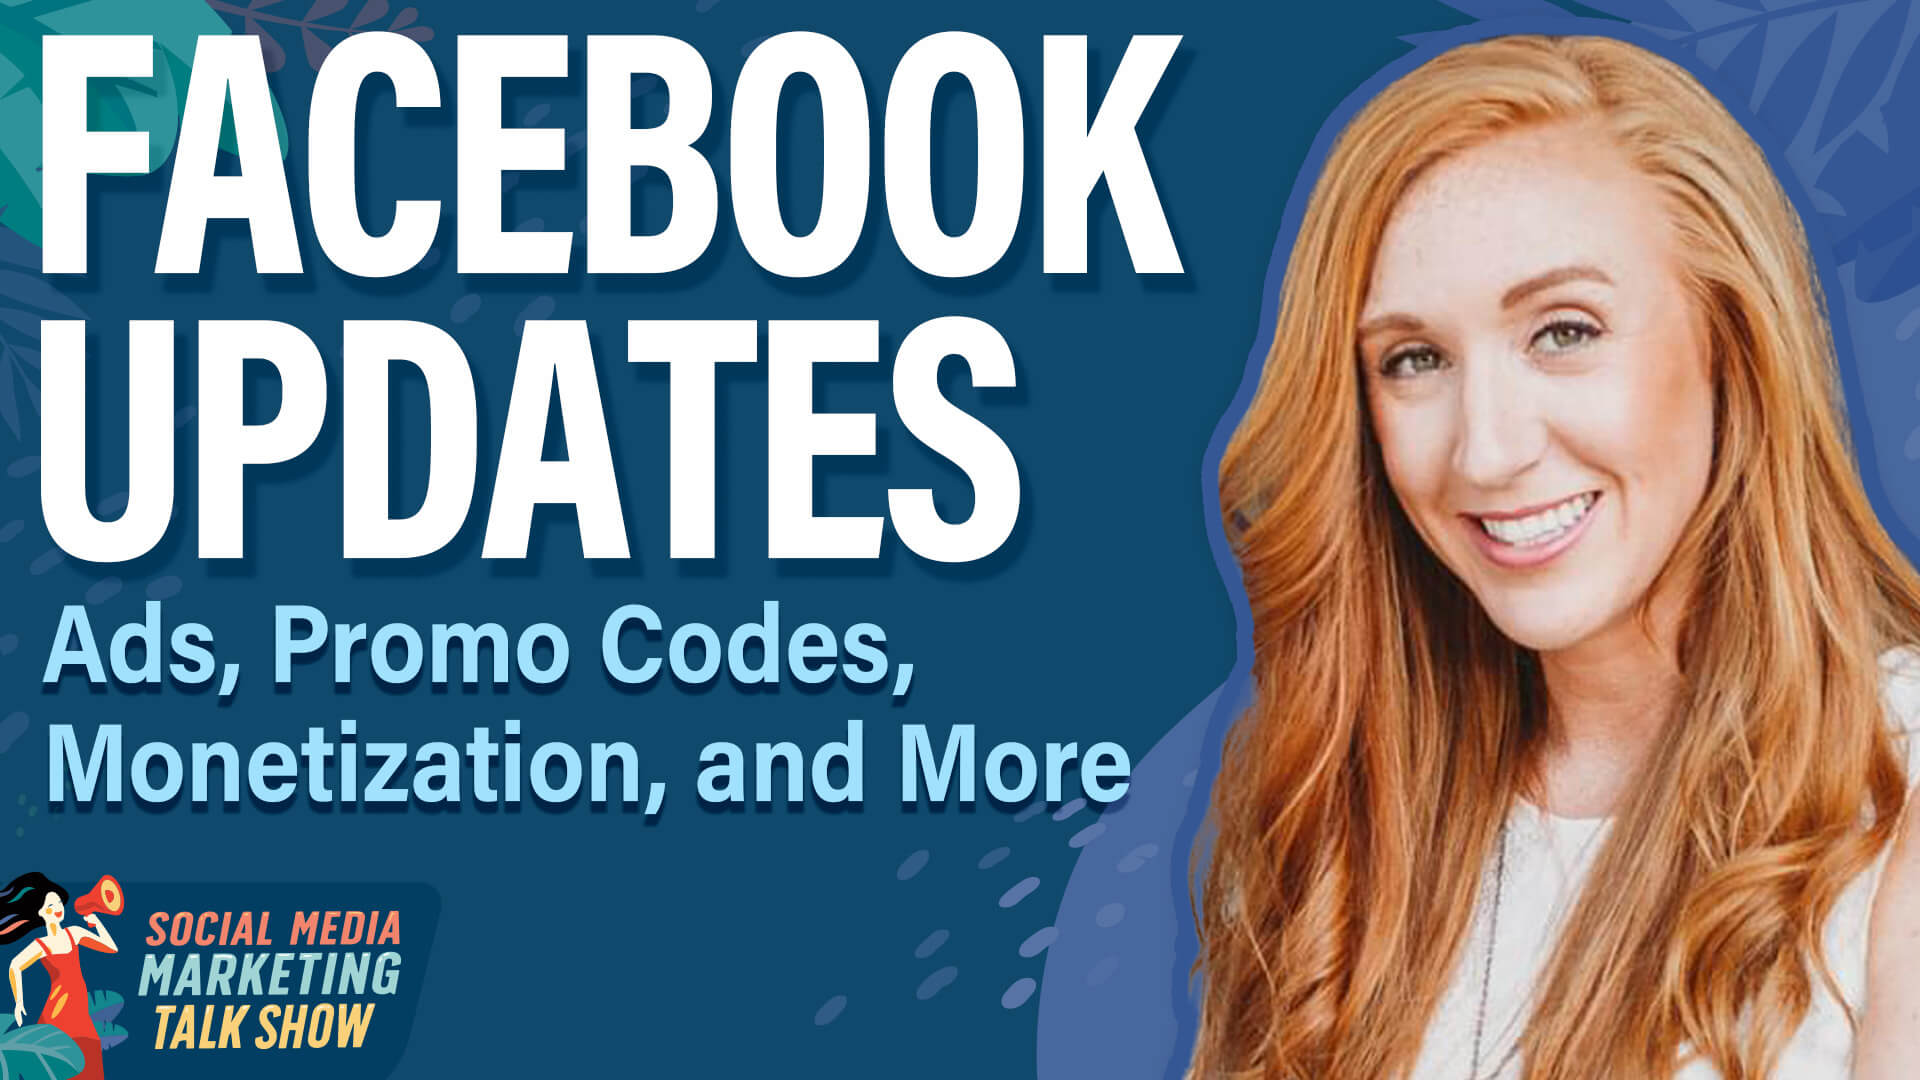 Facebook Updates: Ads, Promo Codes, Monetization, and More by Social Media Examiner